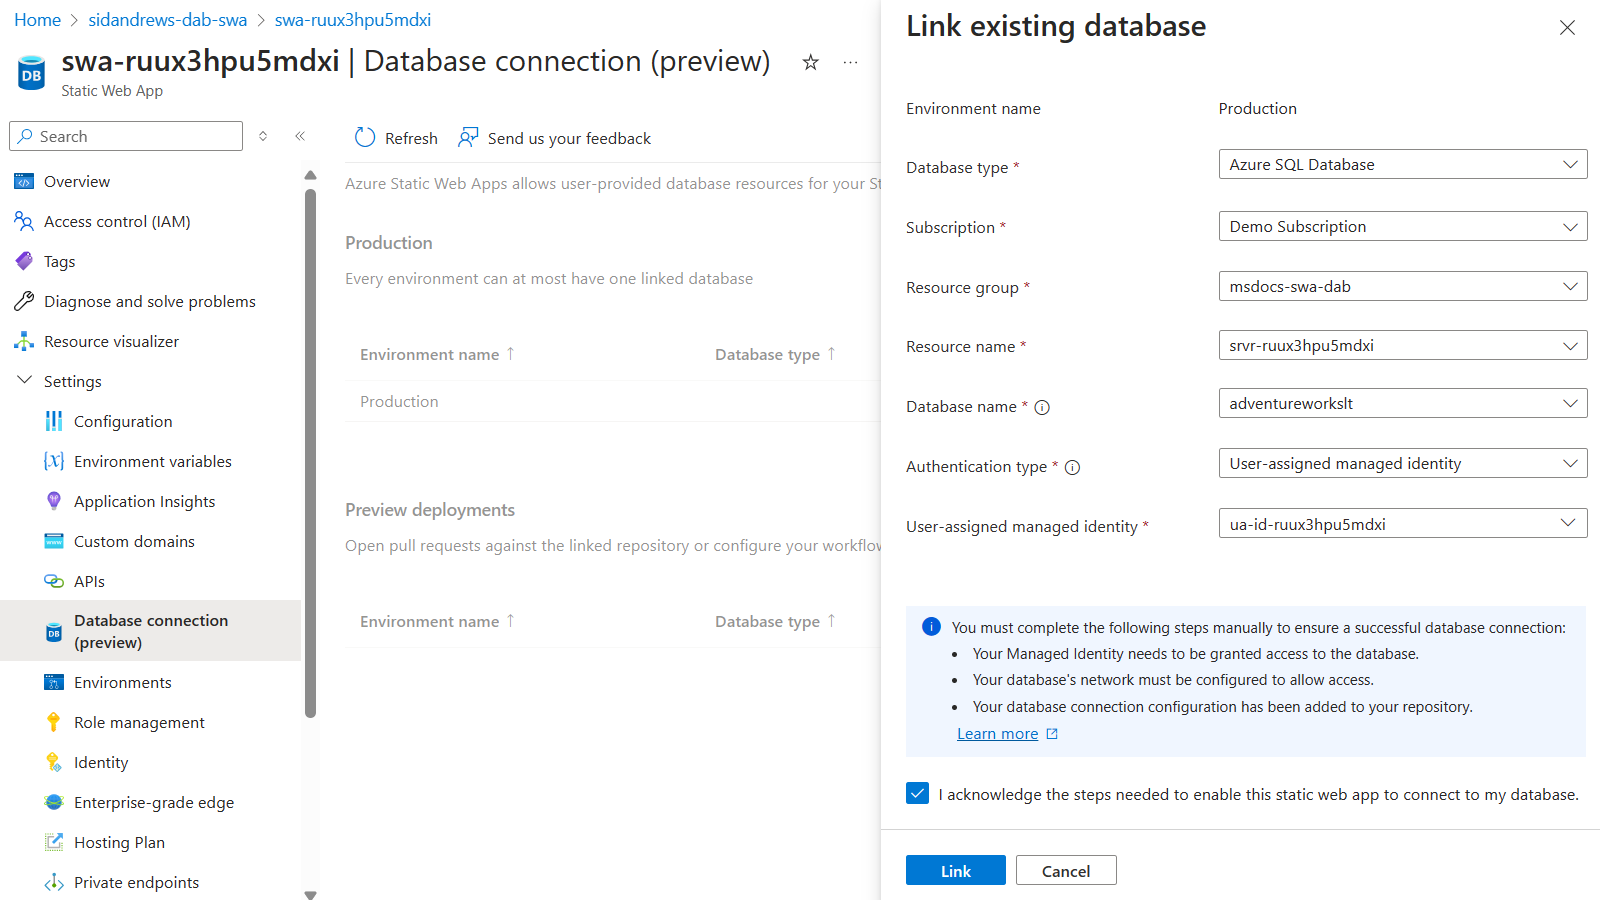 Screenshot of the database connection page for a static web app in the Azure portal.